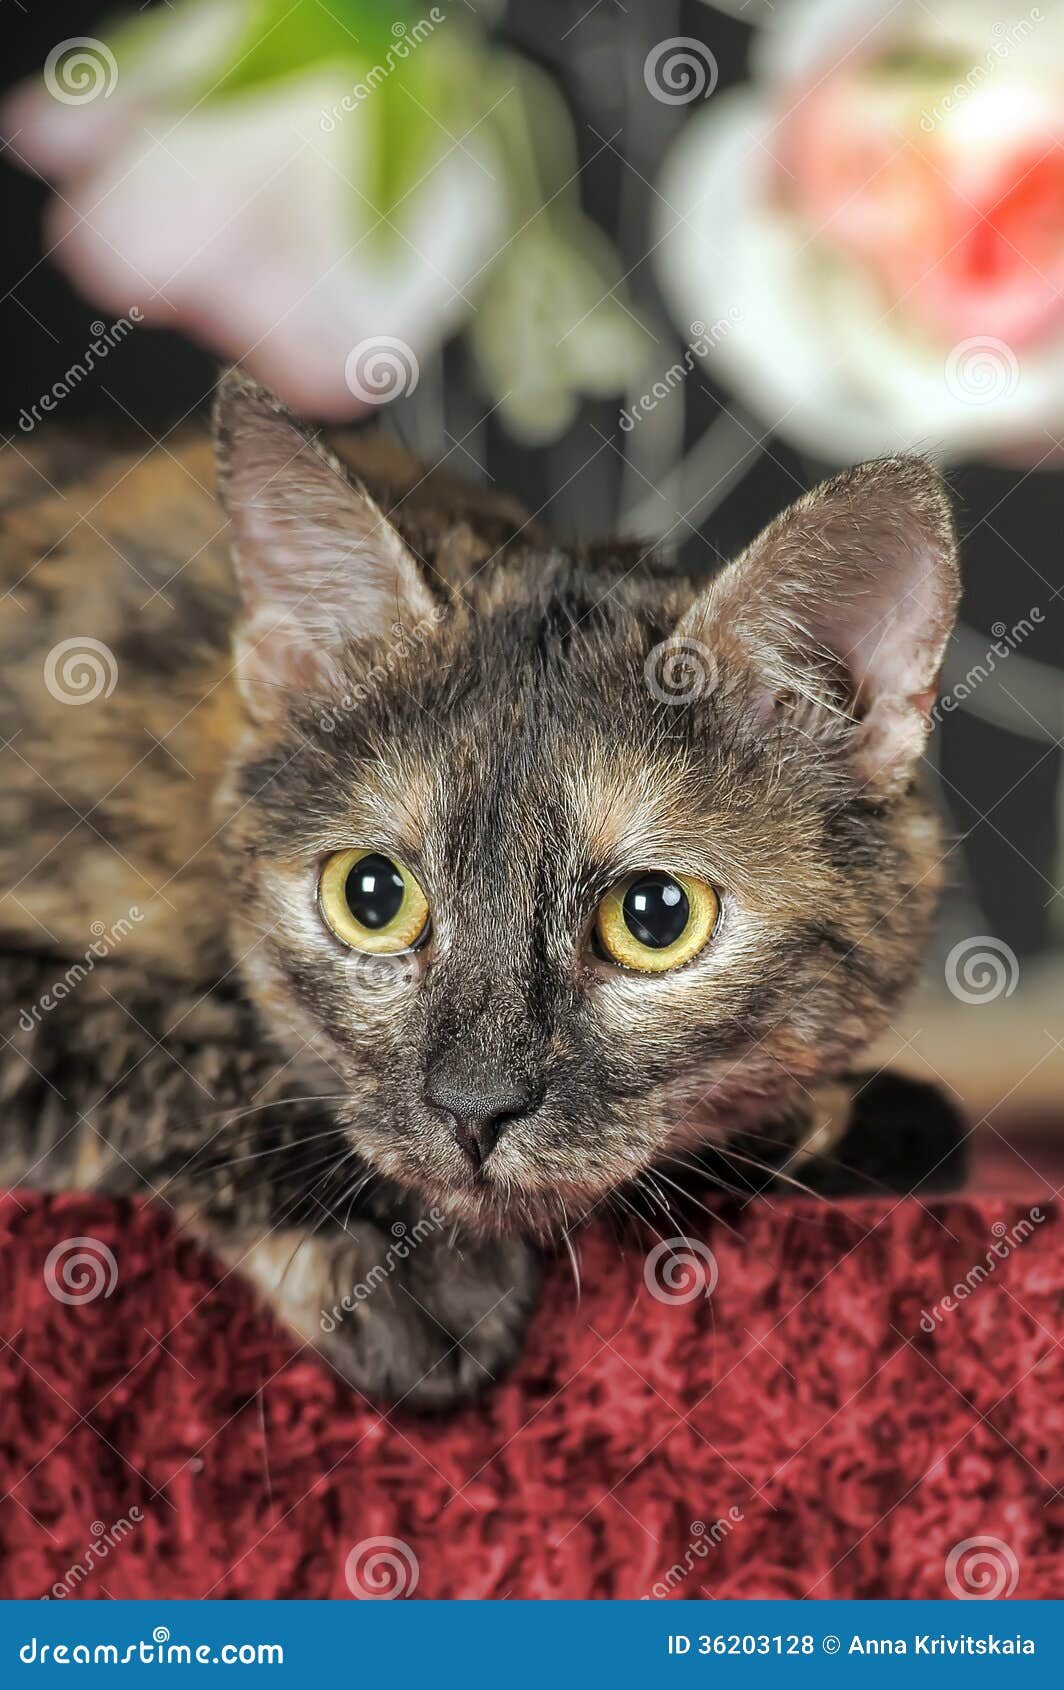 Cat with flowers stock photo. Image of domestic, celebrate - 36203128